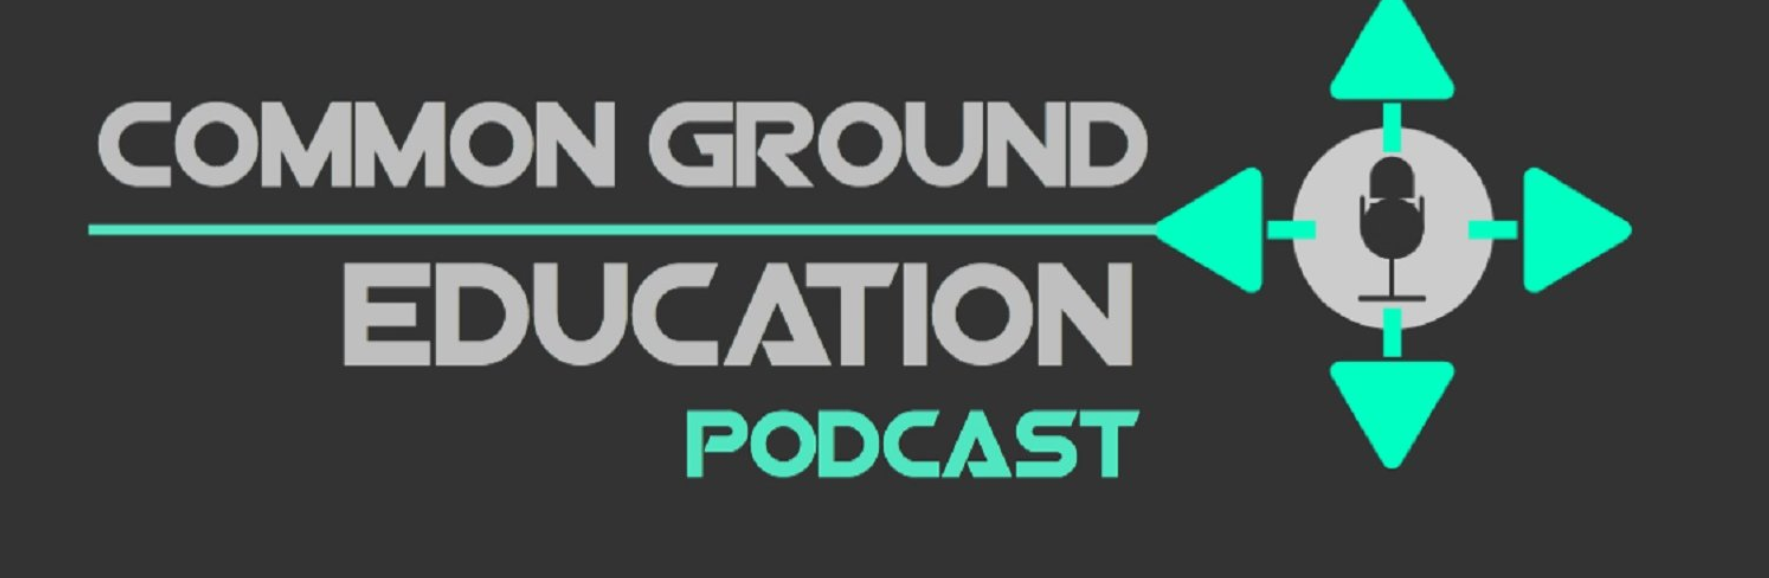 [Listen] Podcast: The Importance of Social-Emotional Learning Visuals in Schools